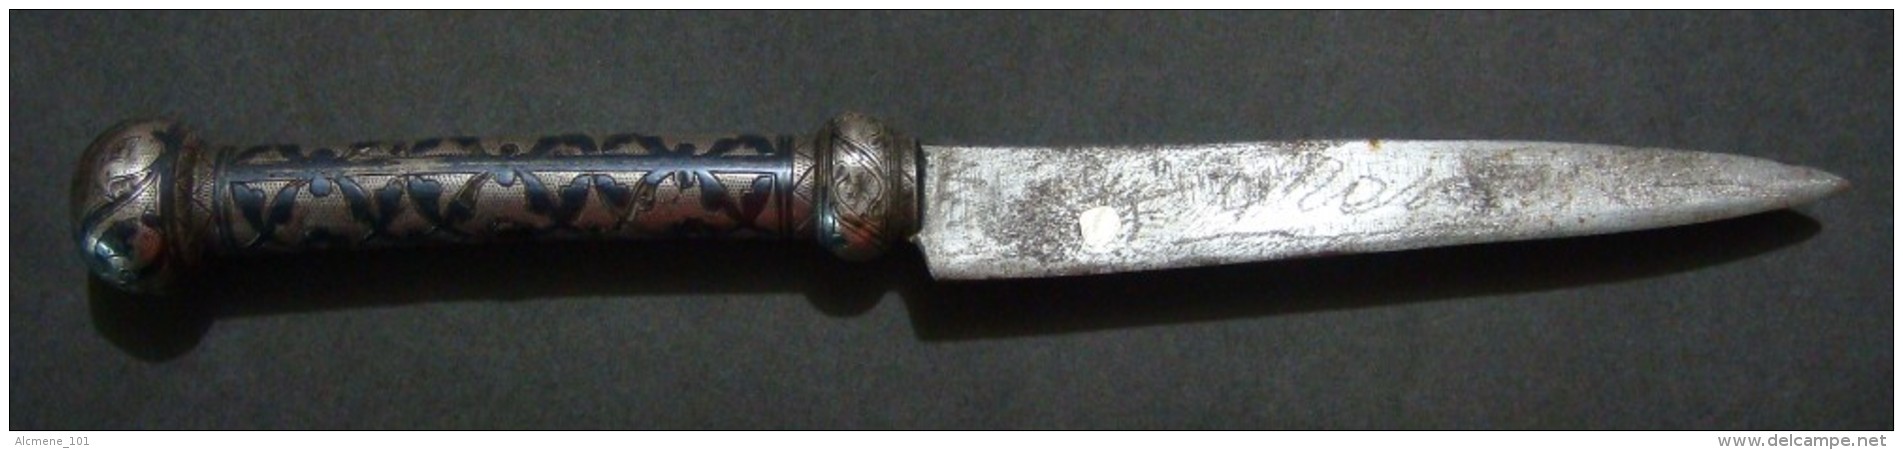 OTTOMAN (TURKISH) KNIFE WITH SILVER HANDLE DECORATED WITH NIELLO (SAVAT) TURBAN AT TOP, XIX C.A.D.